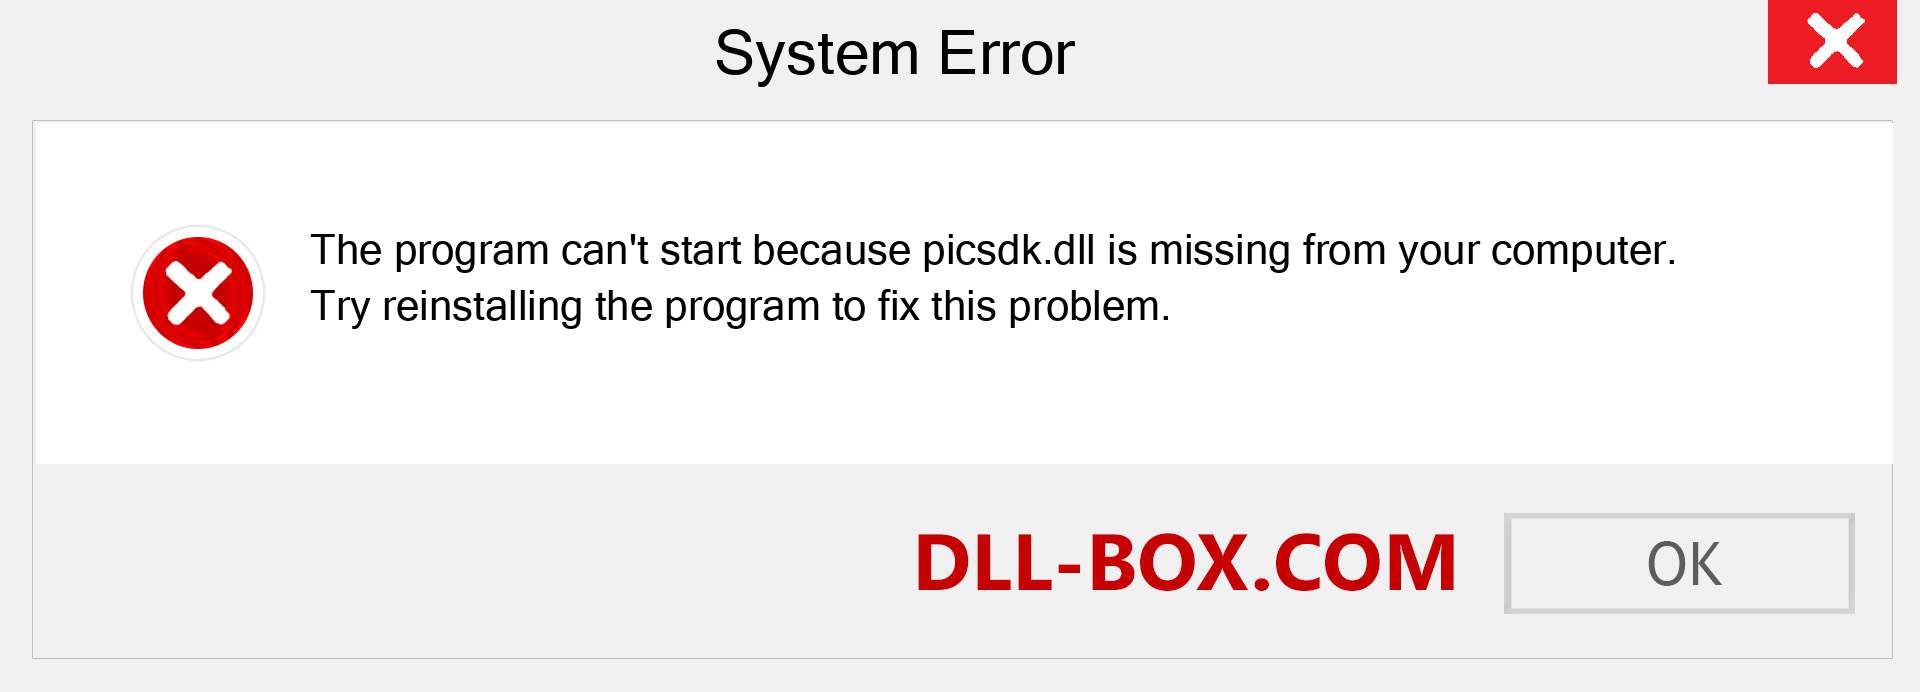  picsdk.dll file is missing?. Download for Windows 7, 8, 10 - Fix  picsdk dll Missing Error on Windows, photos, images